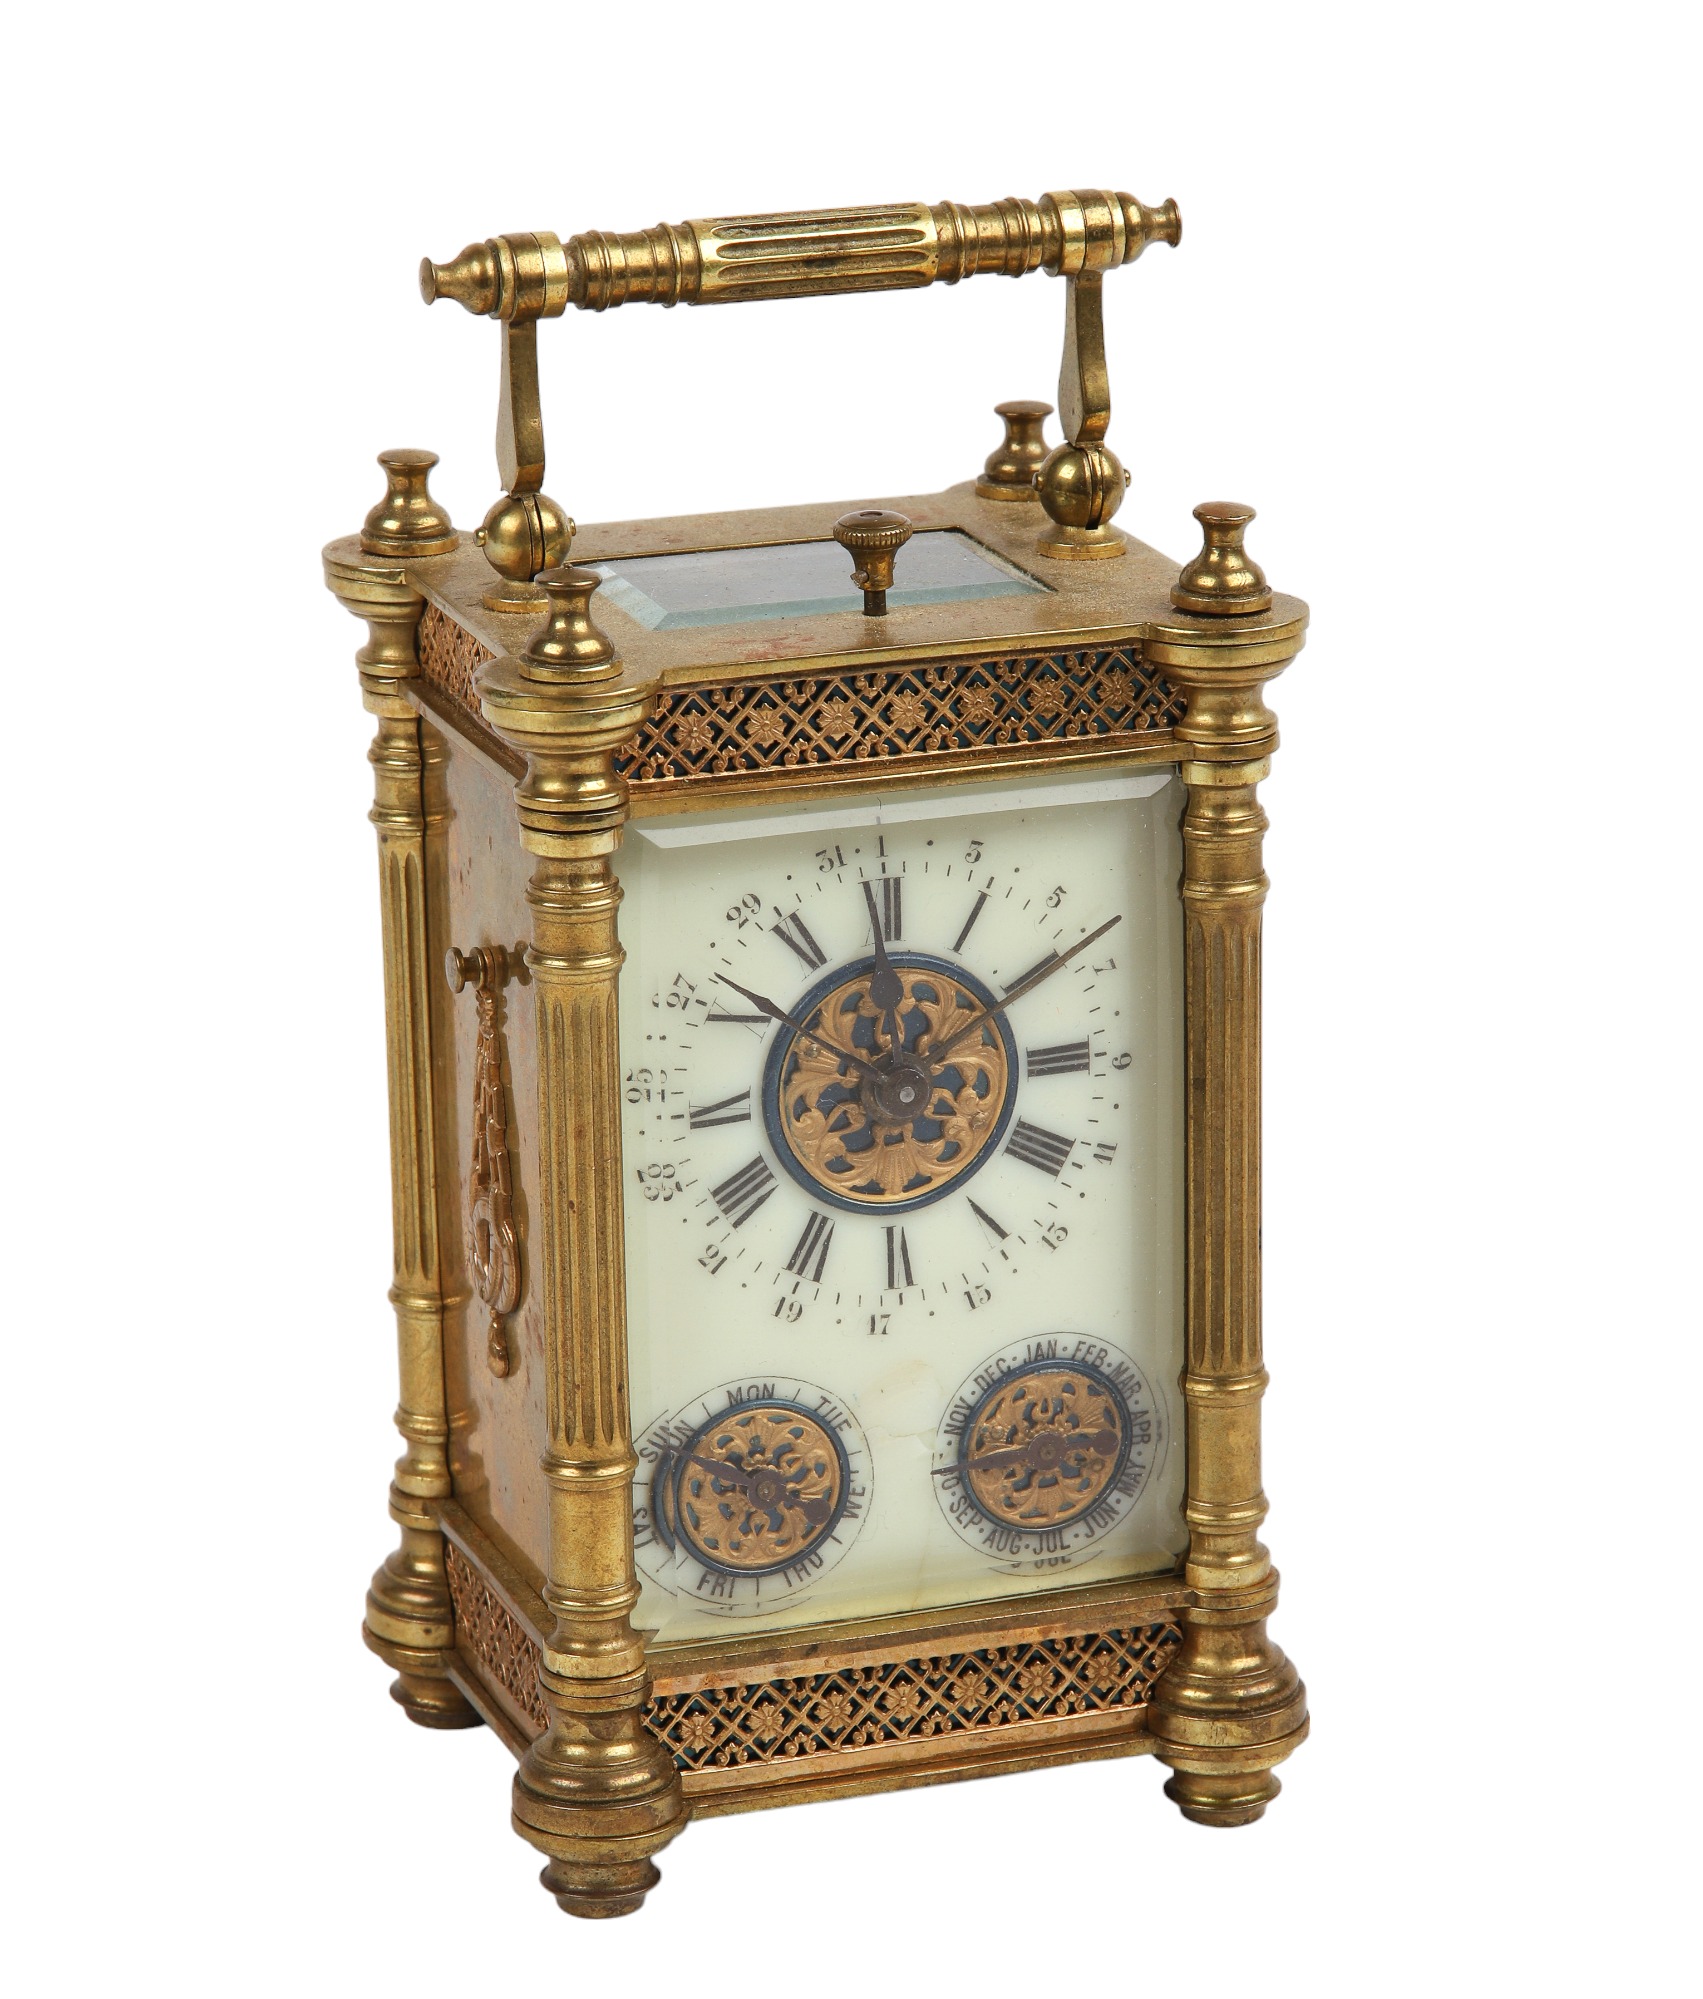 French Repeating Carriage Clock 3ca40a